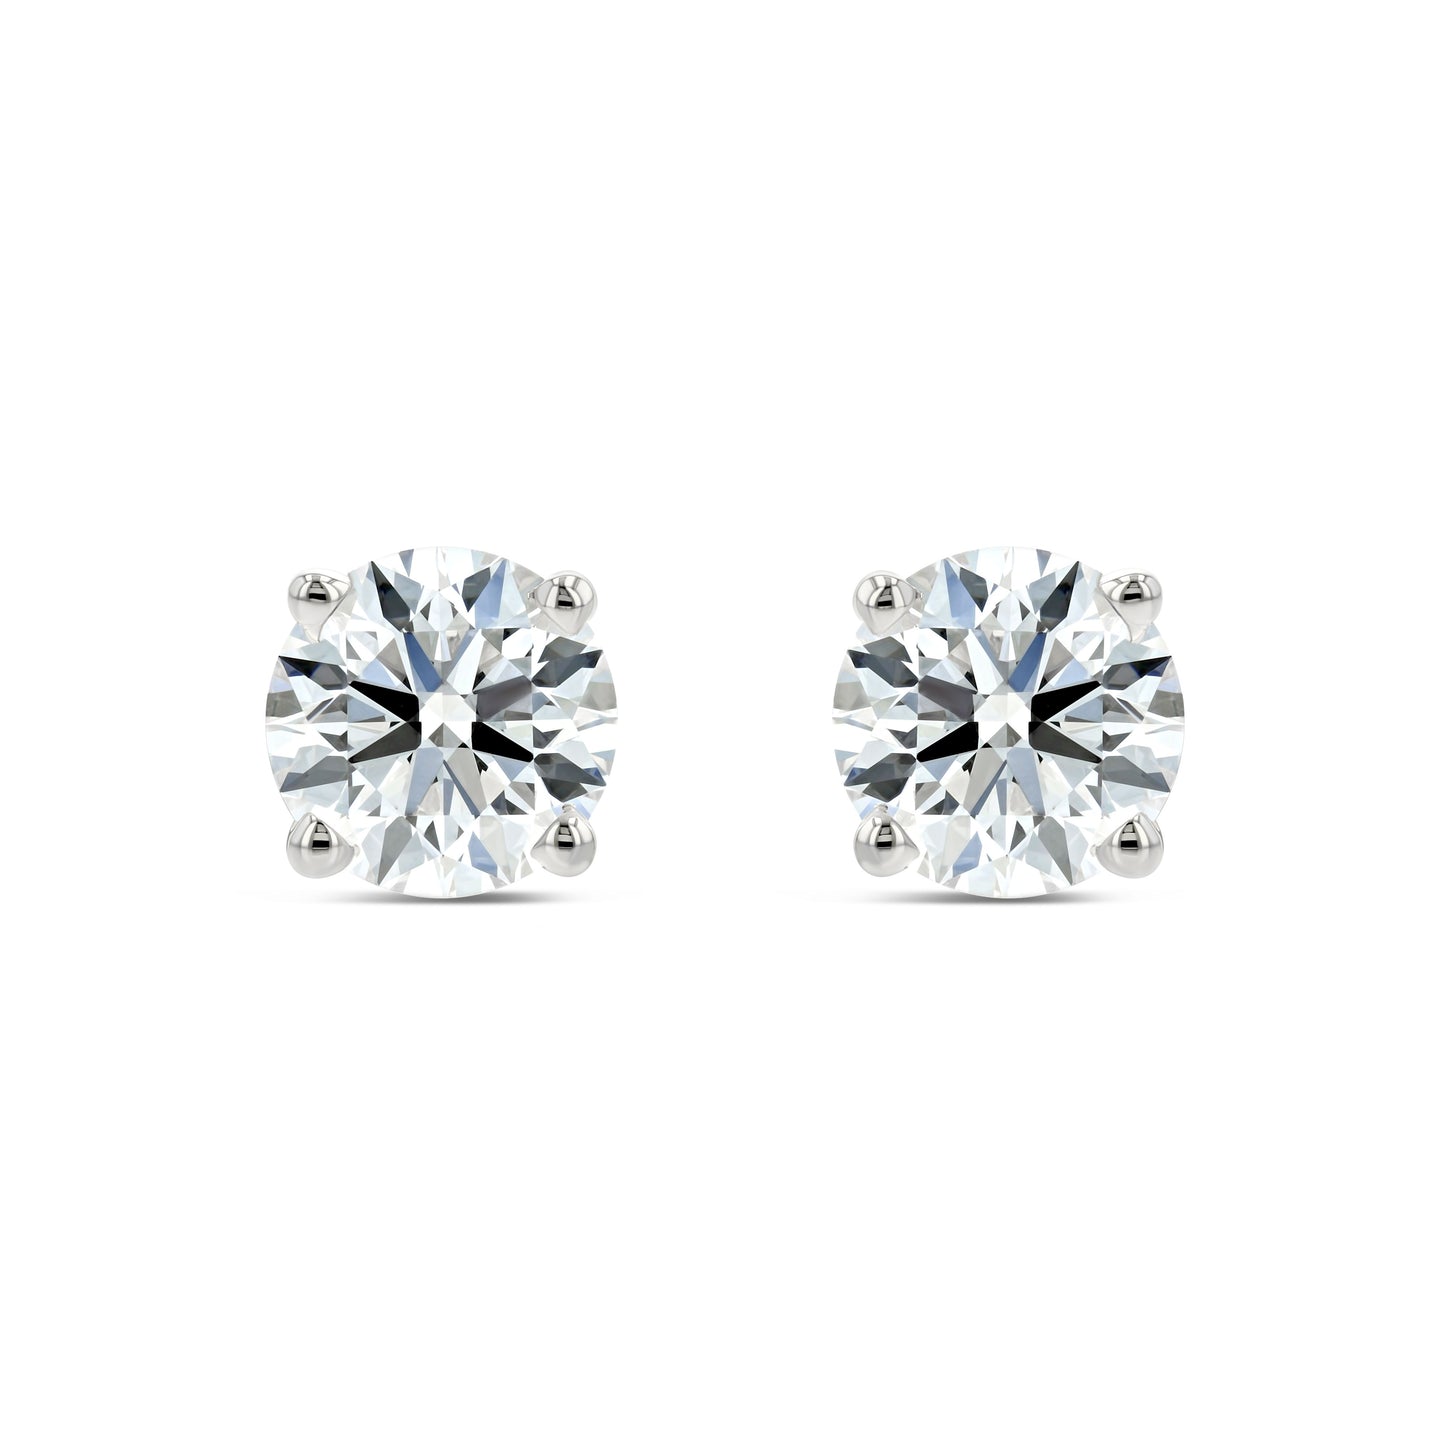 Platinum 4-prong Round Diamond Stud Earrings 1/2ctw (4.0mm Ea), G-h Color, I1 Clarity